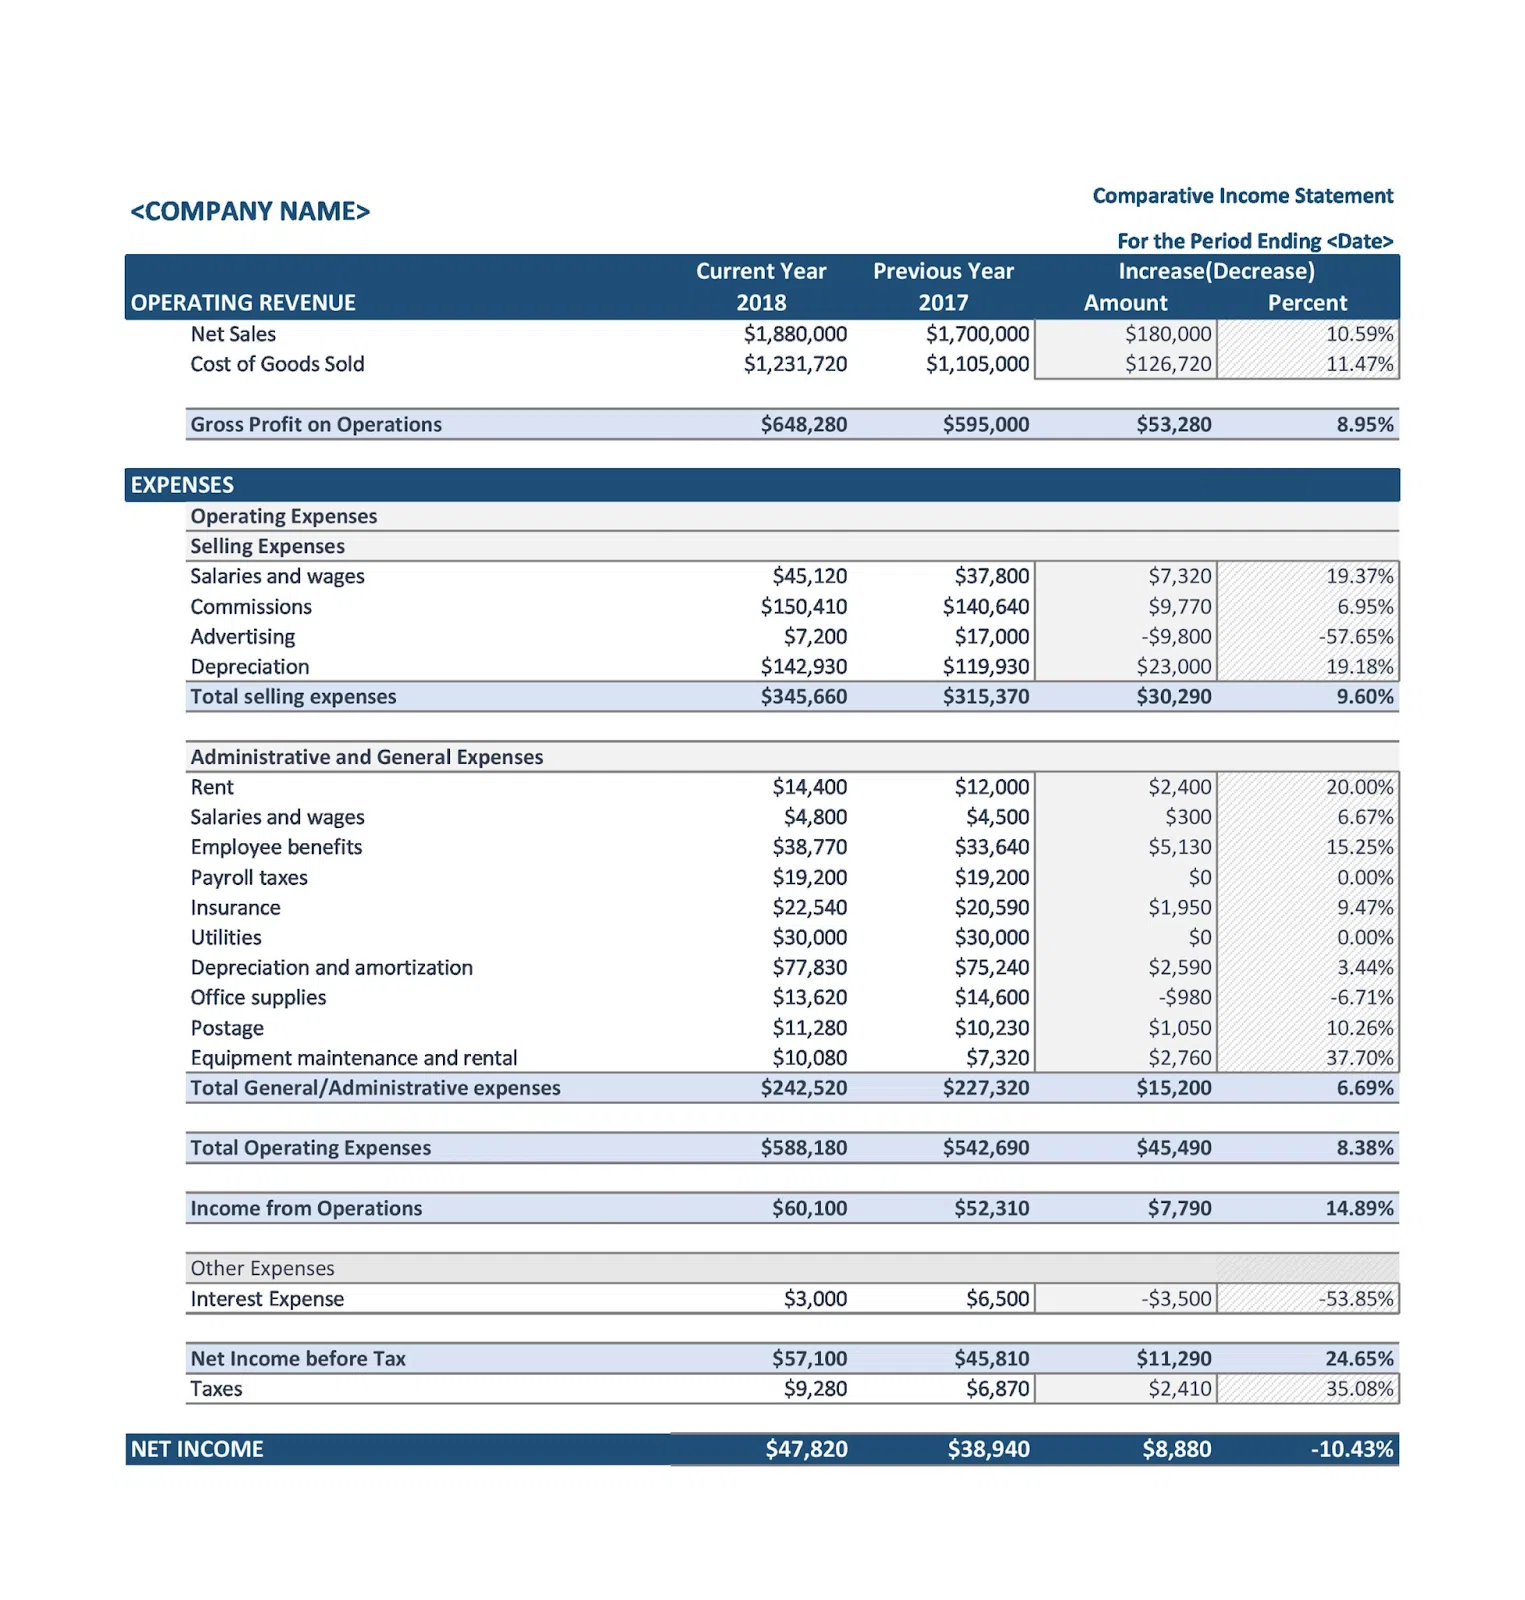 An example of a Comparative Income Statement.